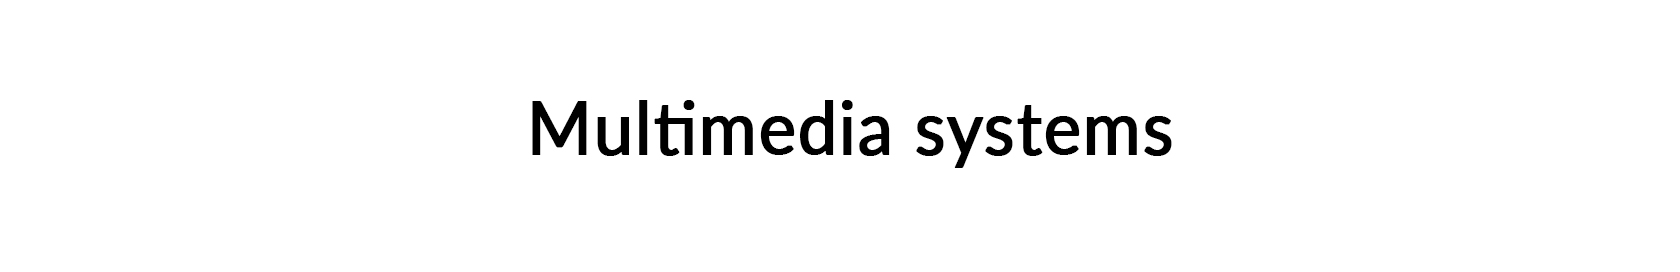 Multimedia systems